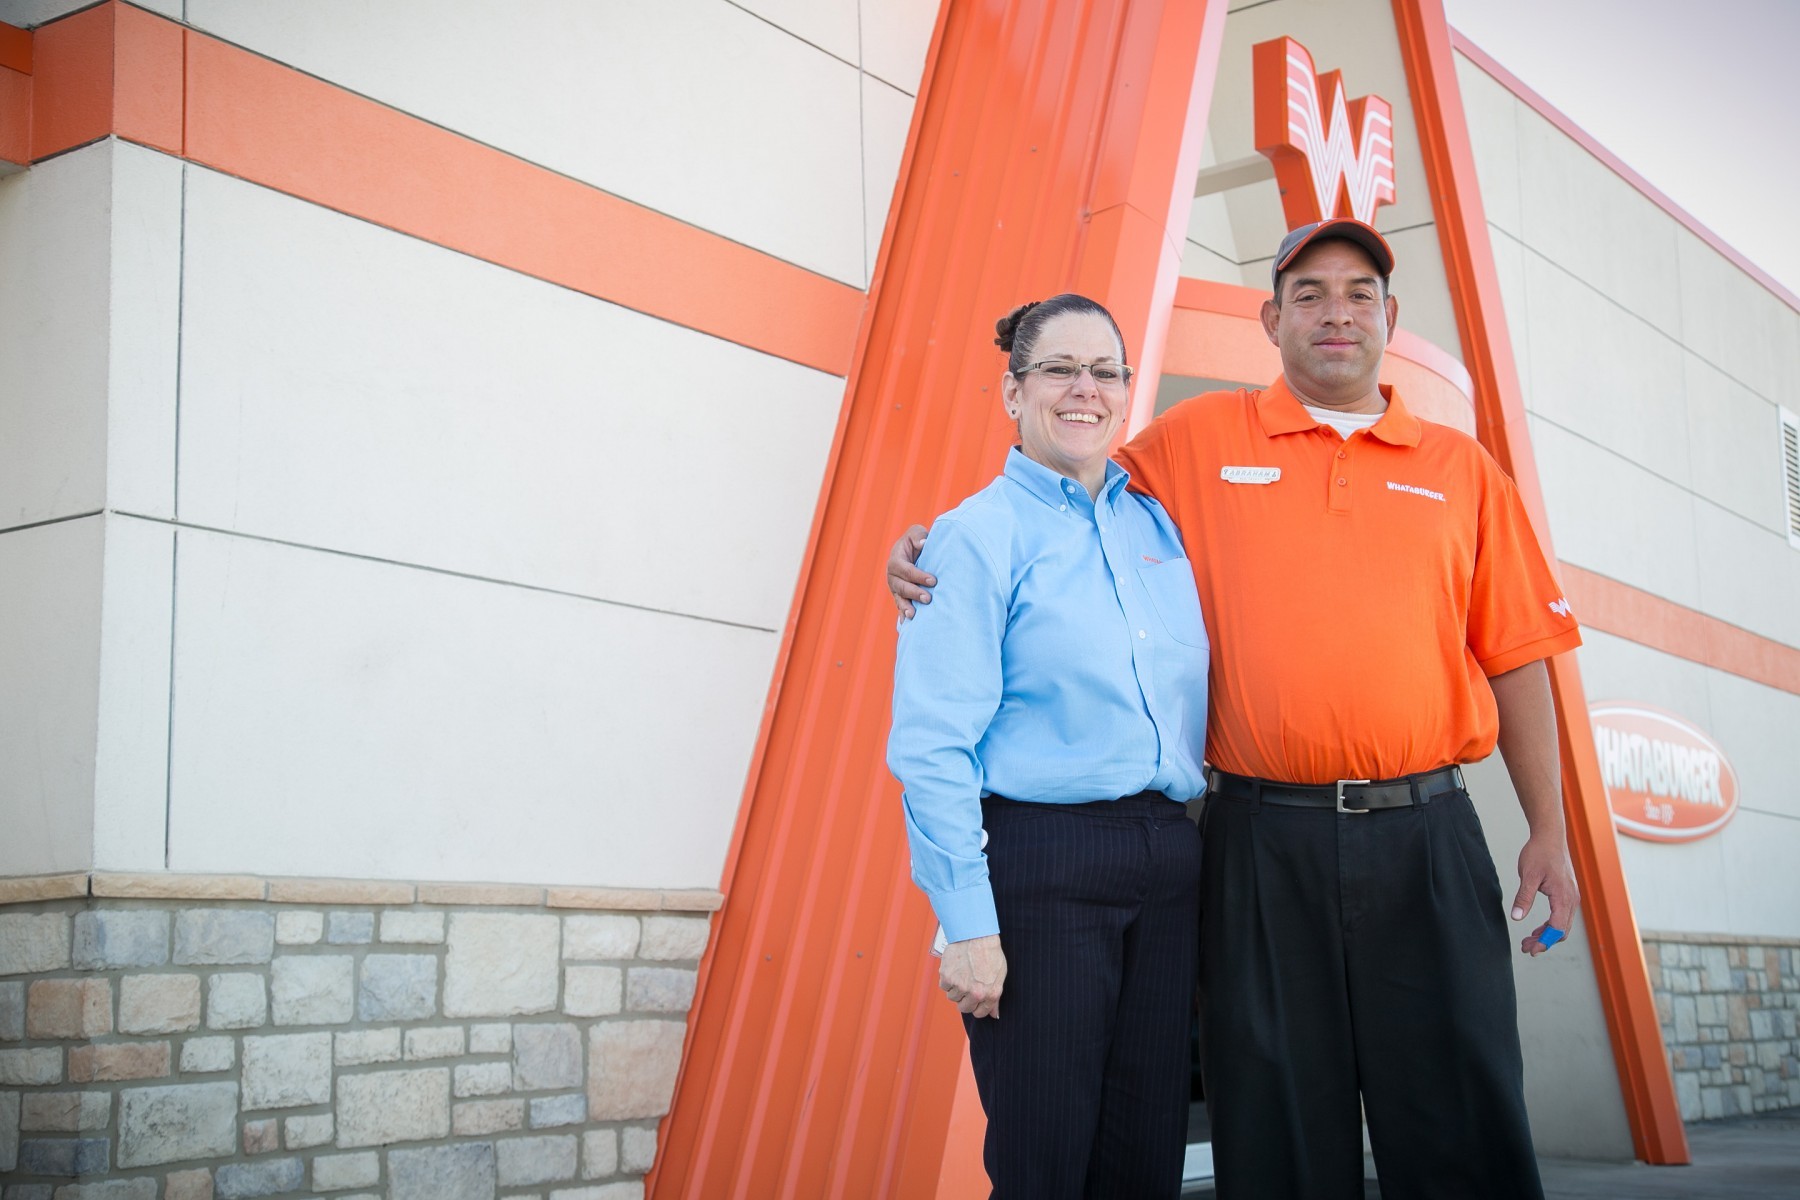 Whataburger Does Corporate Layoff, but Looks to Hire Store-Level